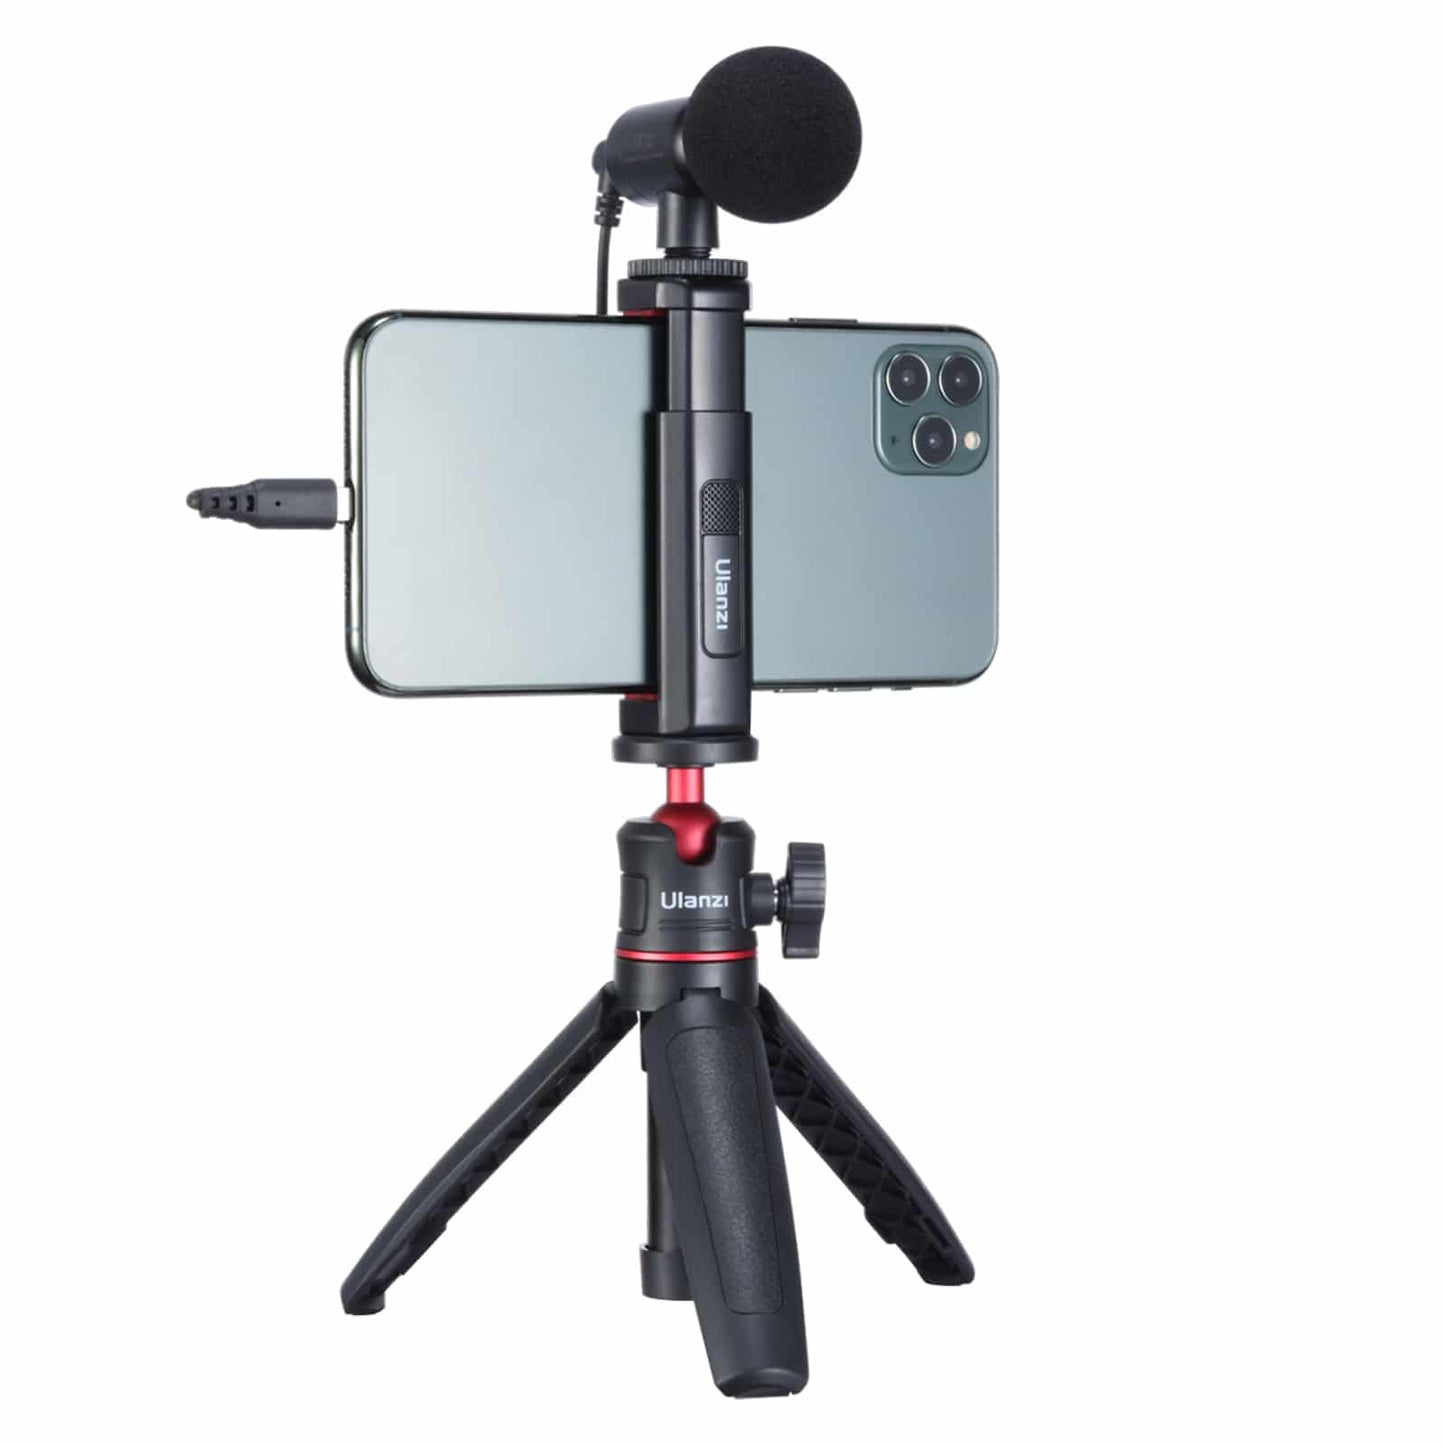 Ulanzi ST-19 compact phone holder for tripod with cold shoe mount